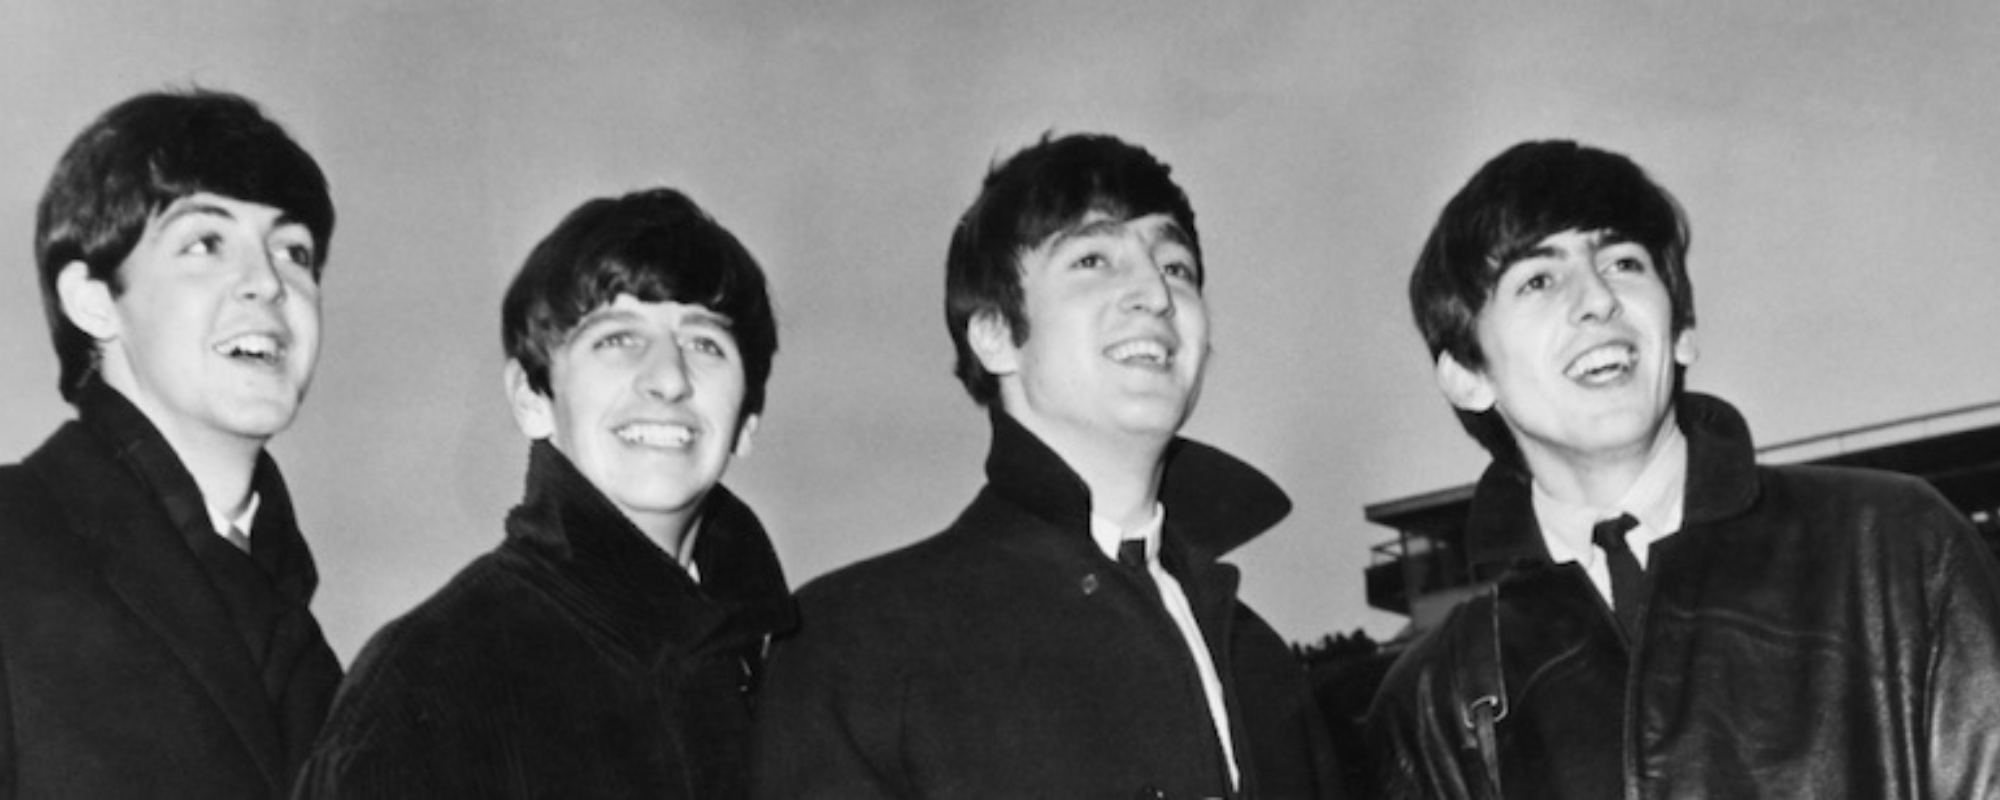 Director Peter Jackson Reveals Details About The Beatles’ “Now and Then” Video, Premiering Friday